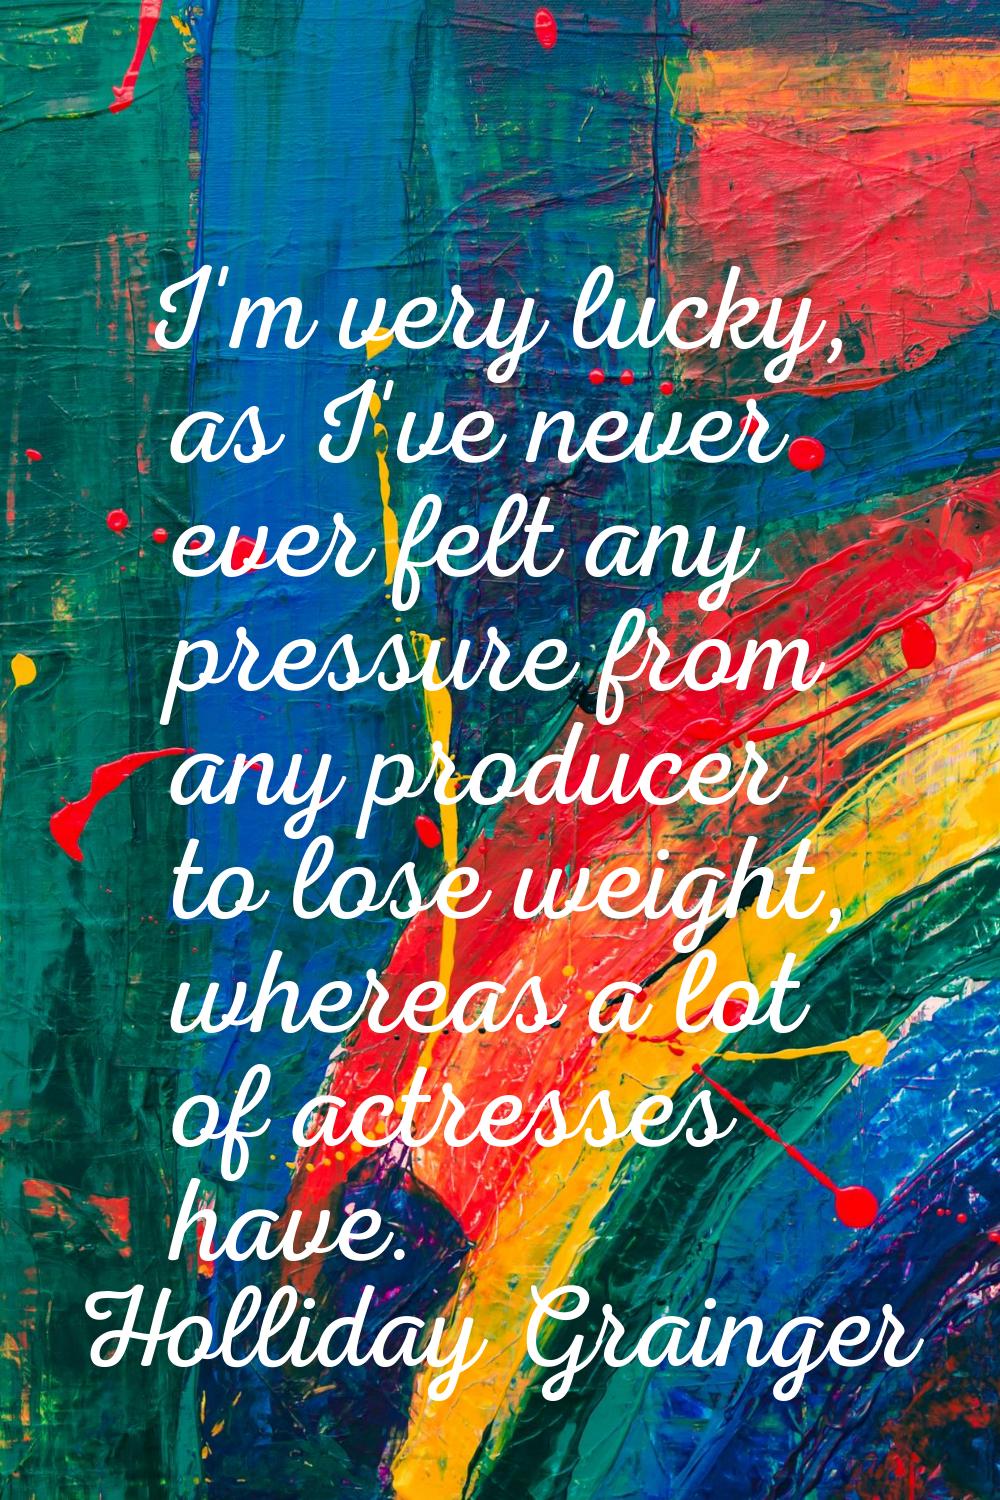 I'm very lucky, as I've never ever felt any pressure from any producer to lose weight, whereas a lo